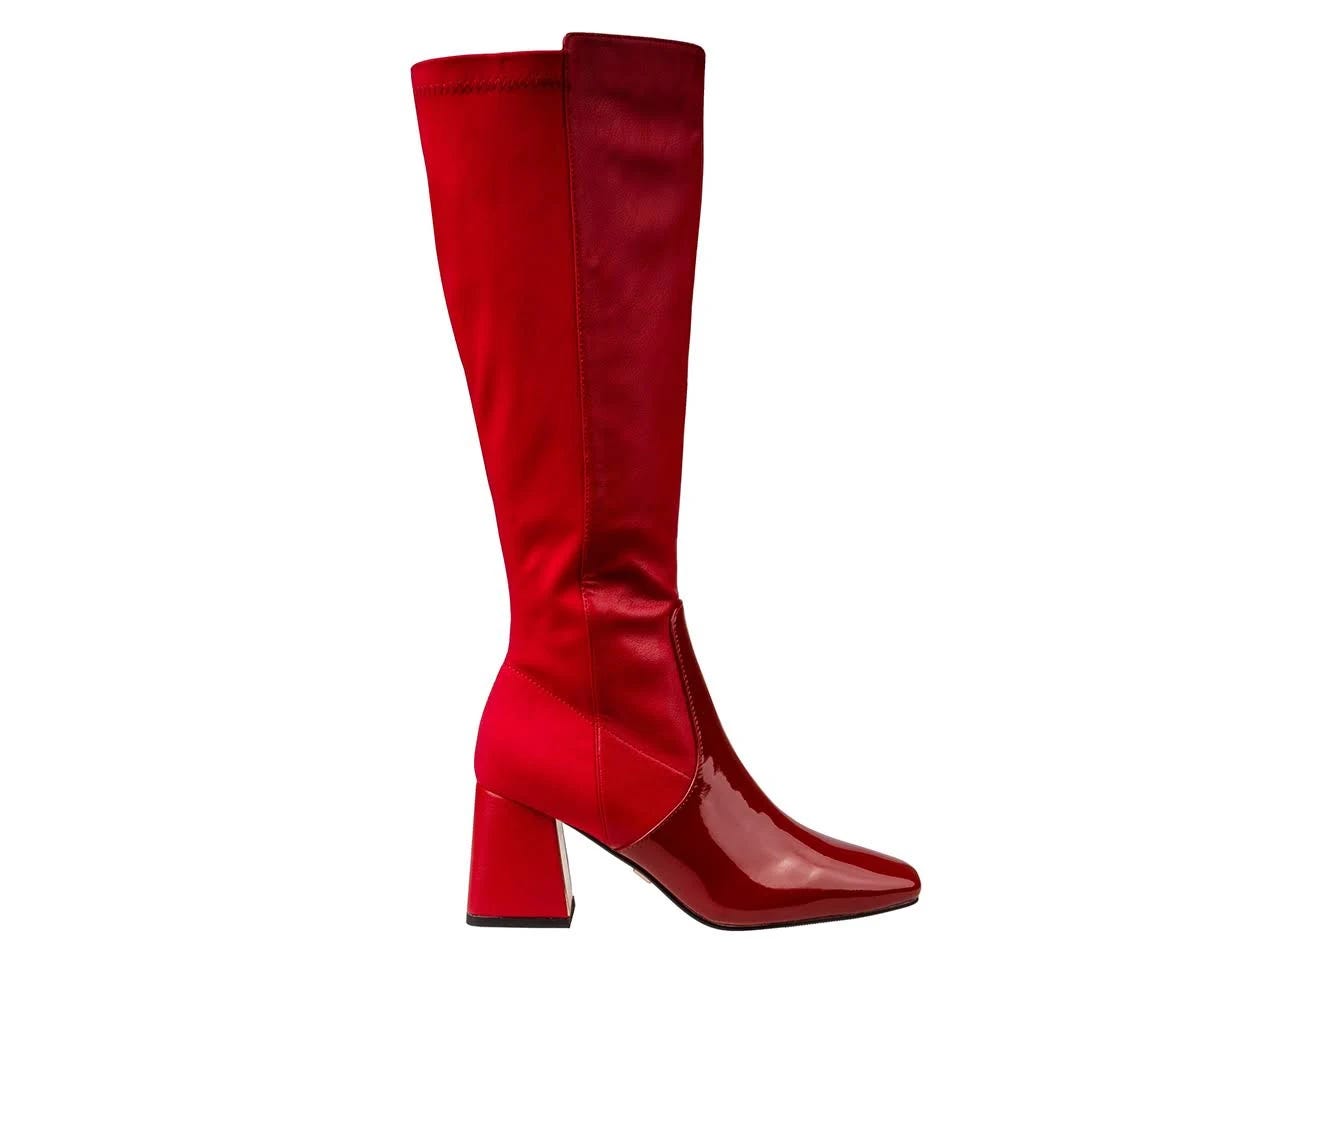 Stylish Women's Red Knee-High Patent Leather Boot with Stretch Back | Image